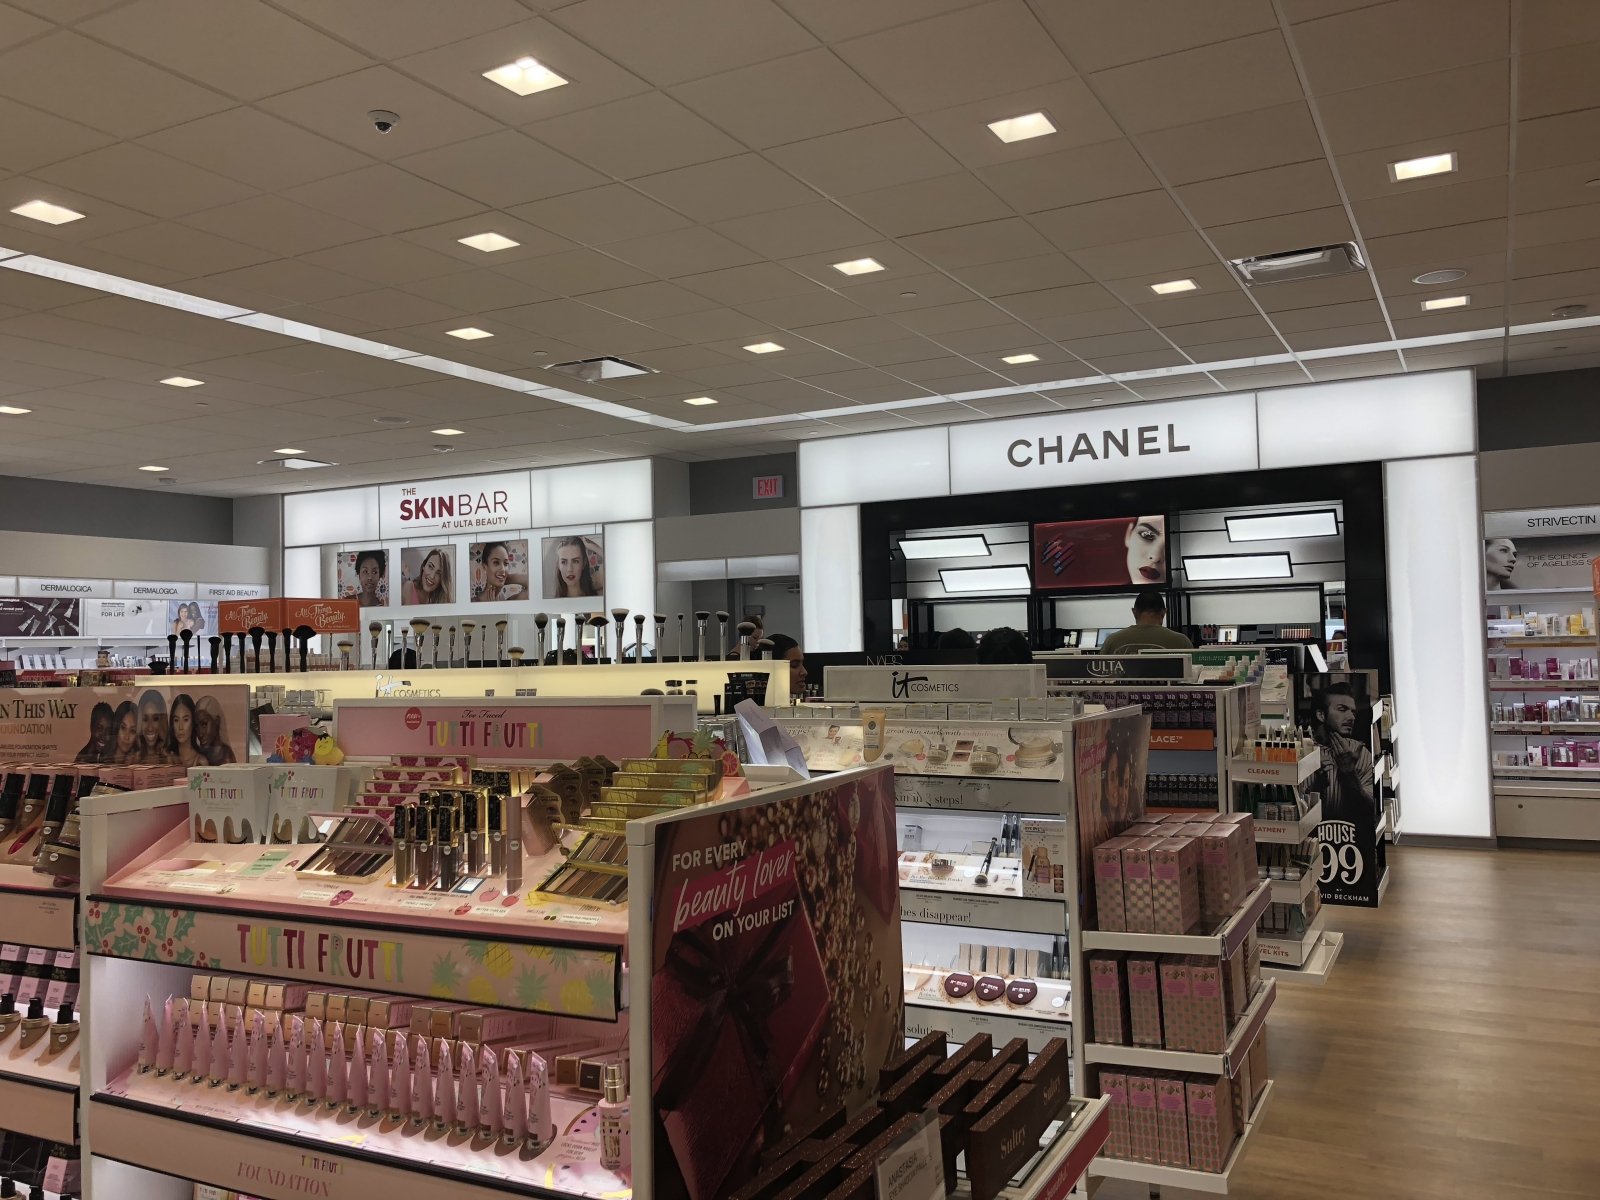 10 Shamazing Reasons to Check Out The New Ulta Beauty in Kailua